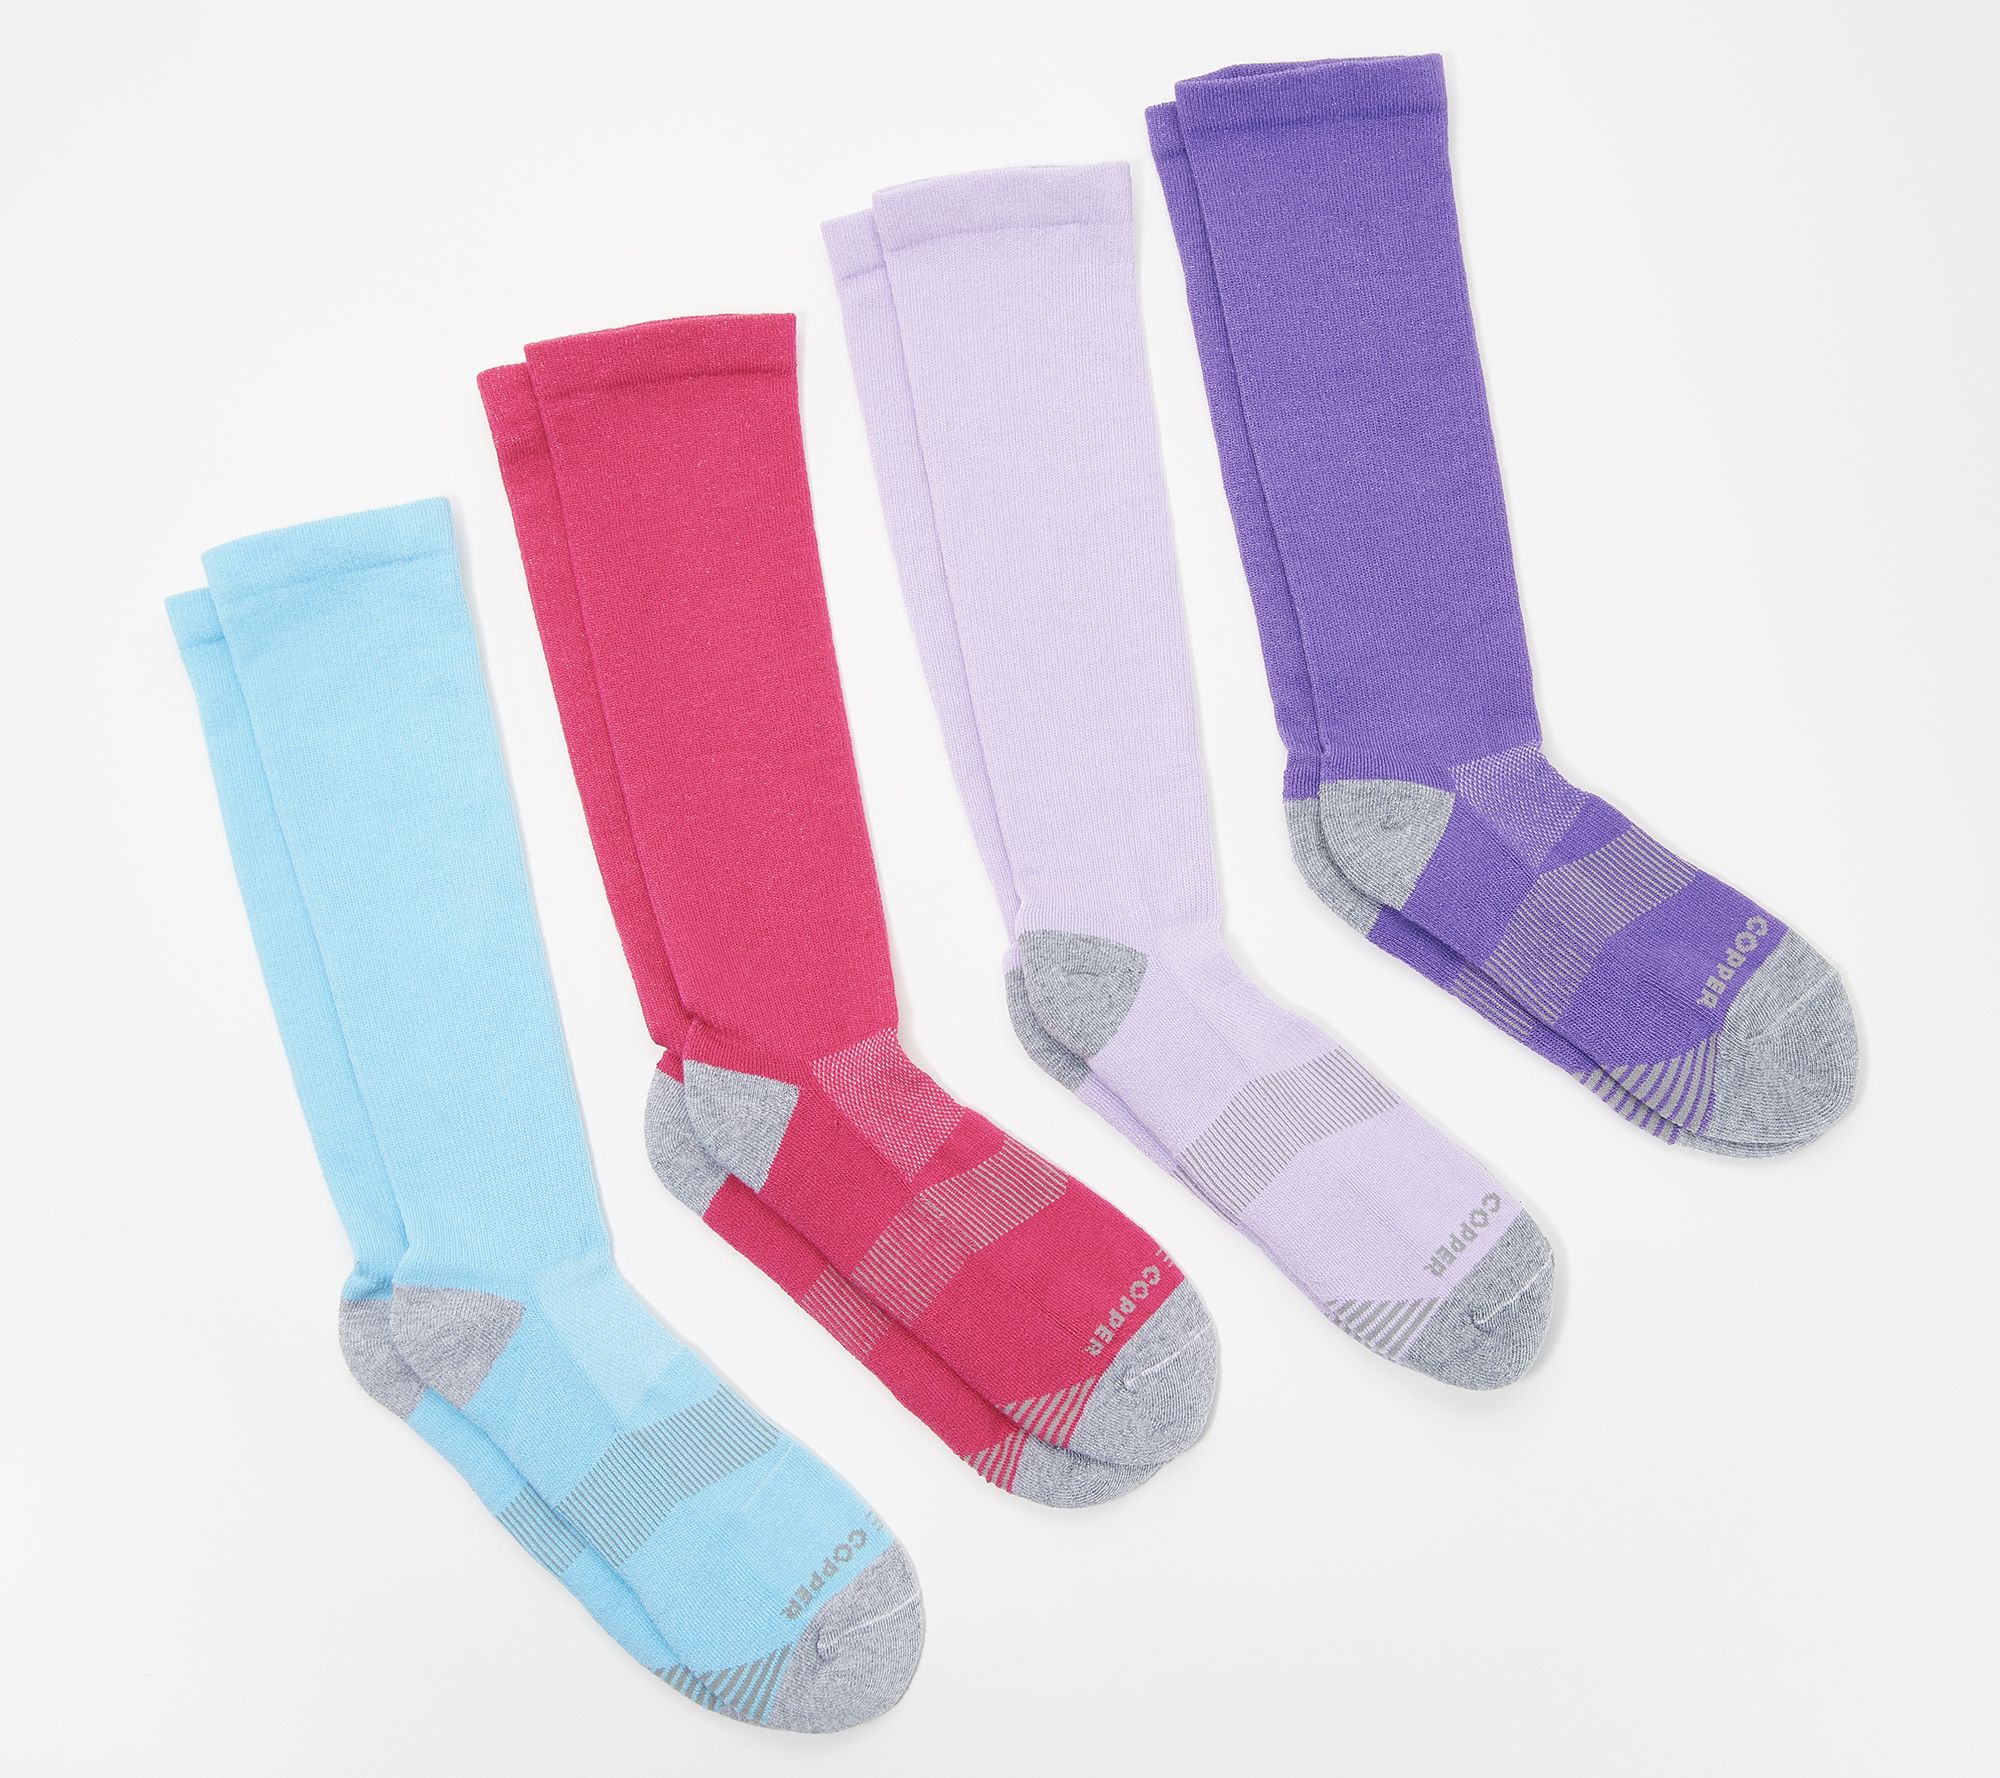 4-Pack Compression Over the Calf Socks 